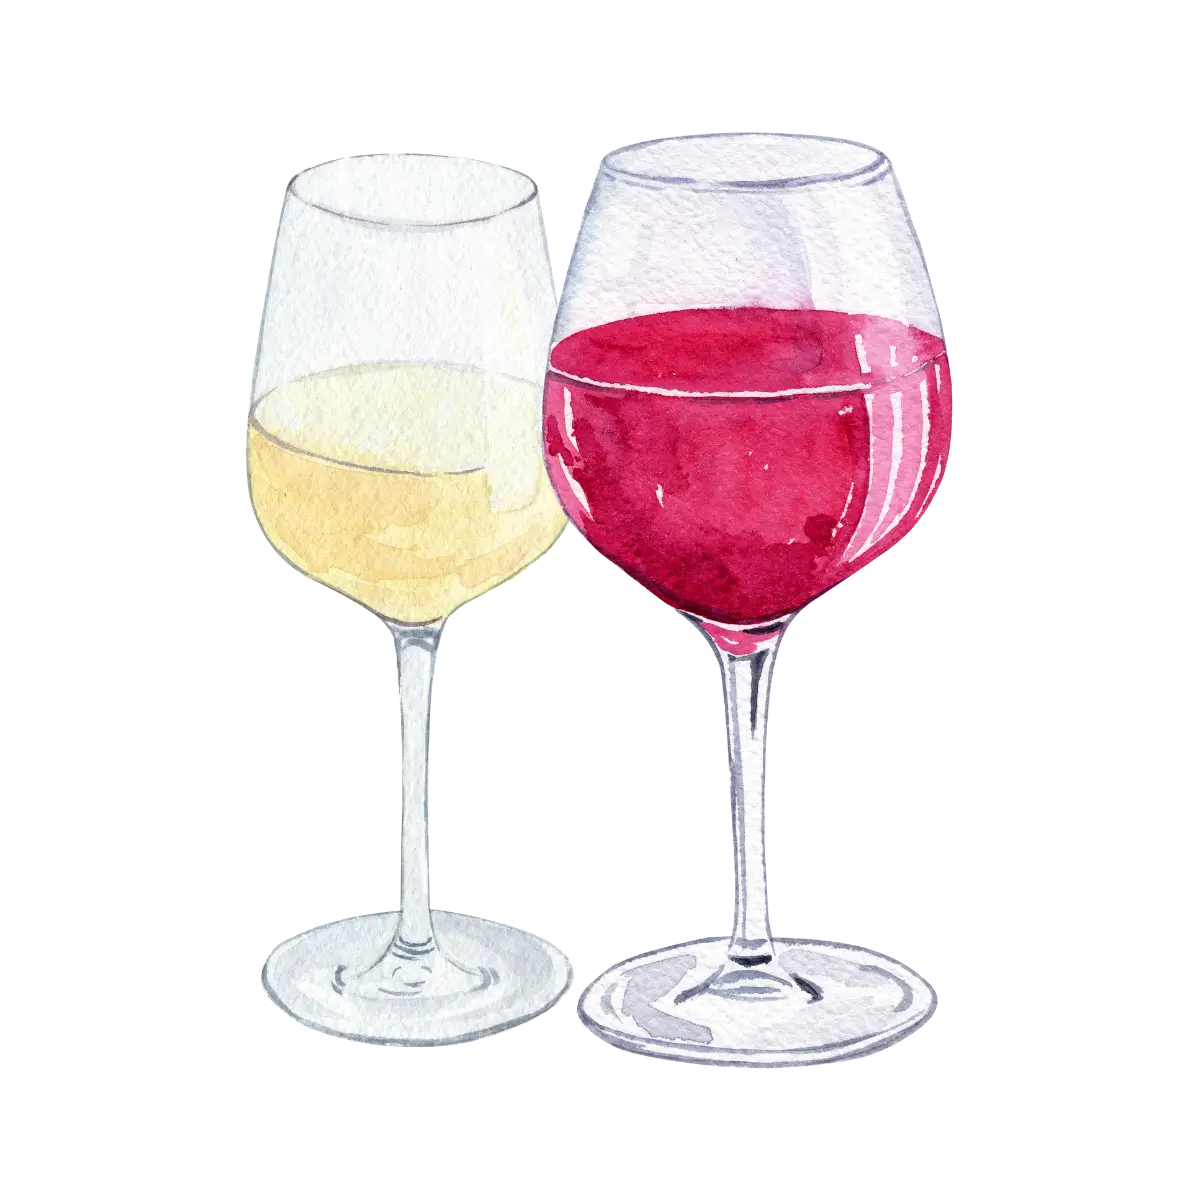 watercolor image of a white and red wine glasses